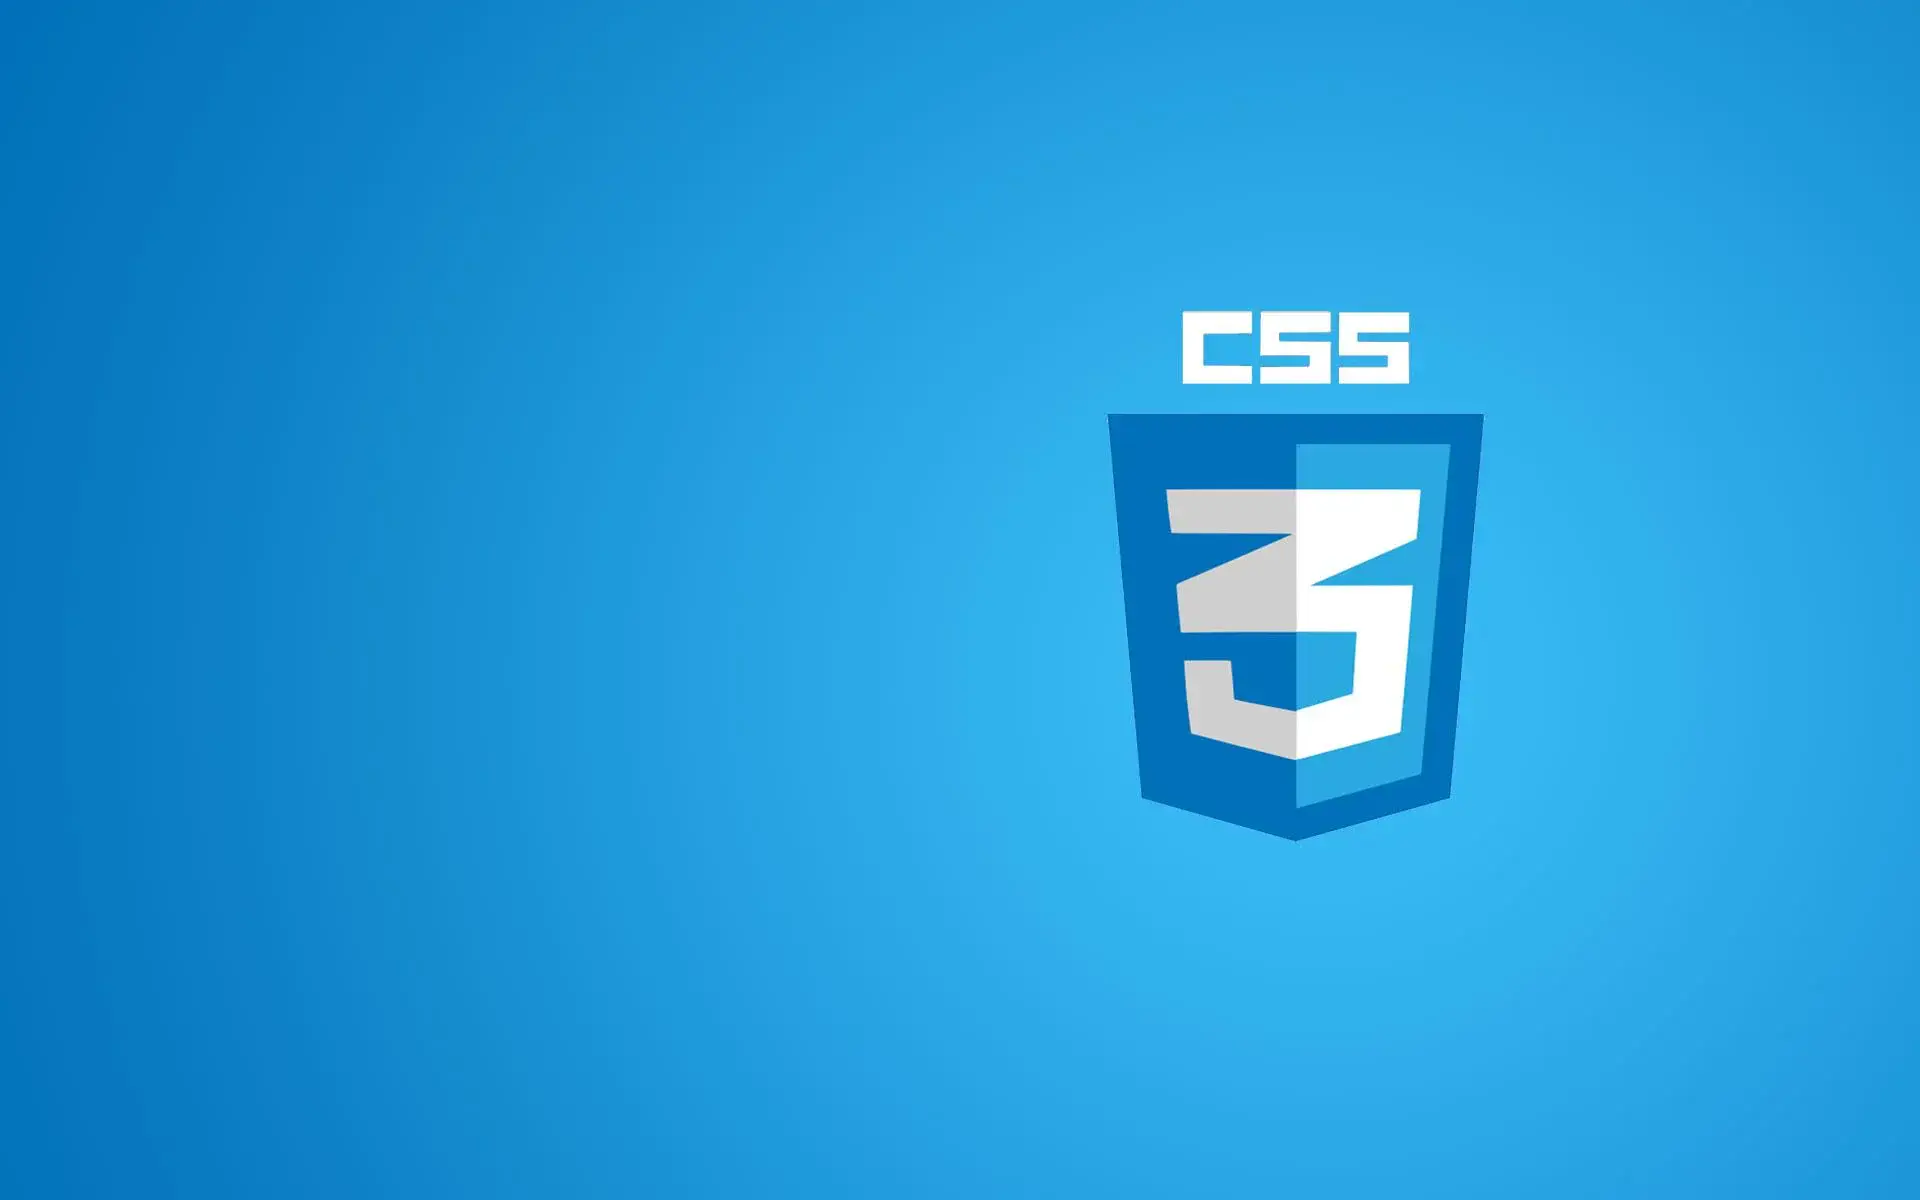 Top 8 Upcoming CSS Conferences that you shouldn't miss